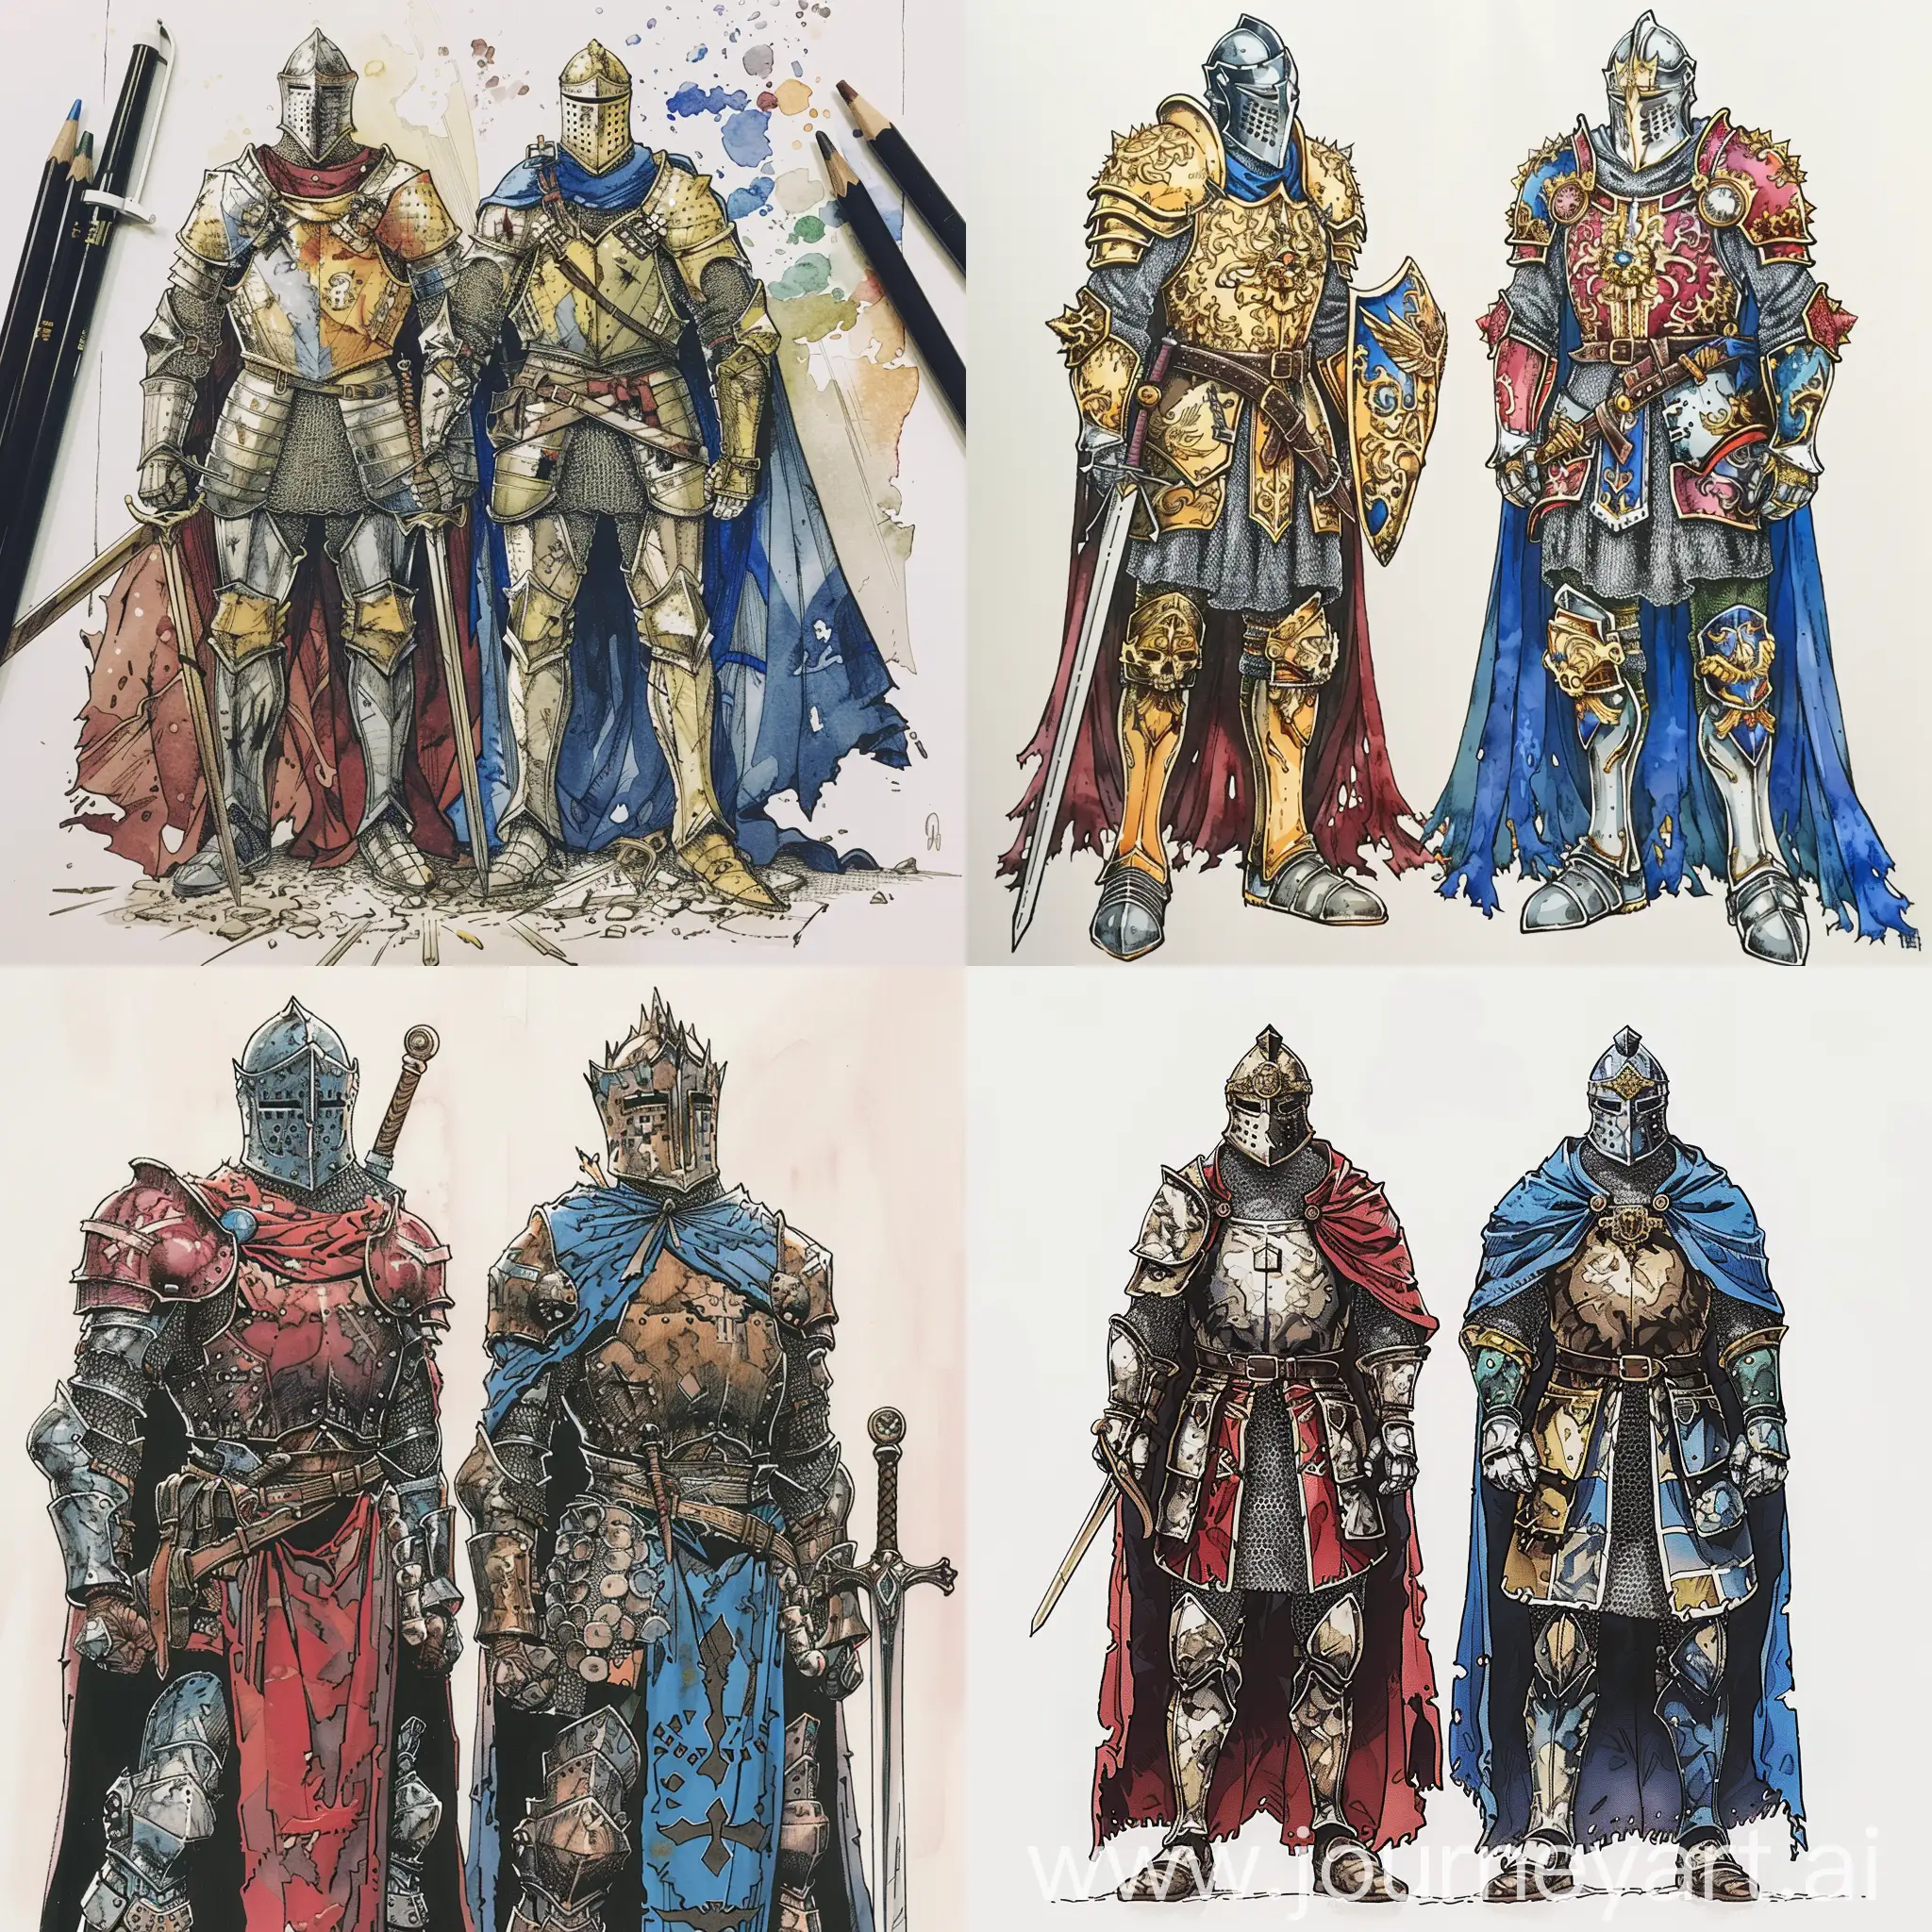 Make the a image of a EXTREMLY DETAILED medieval themed colored MANGA of 2 knights standing side by side